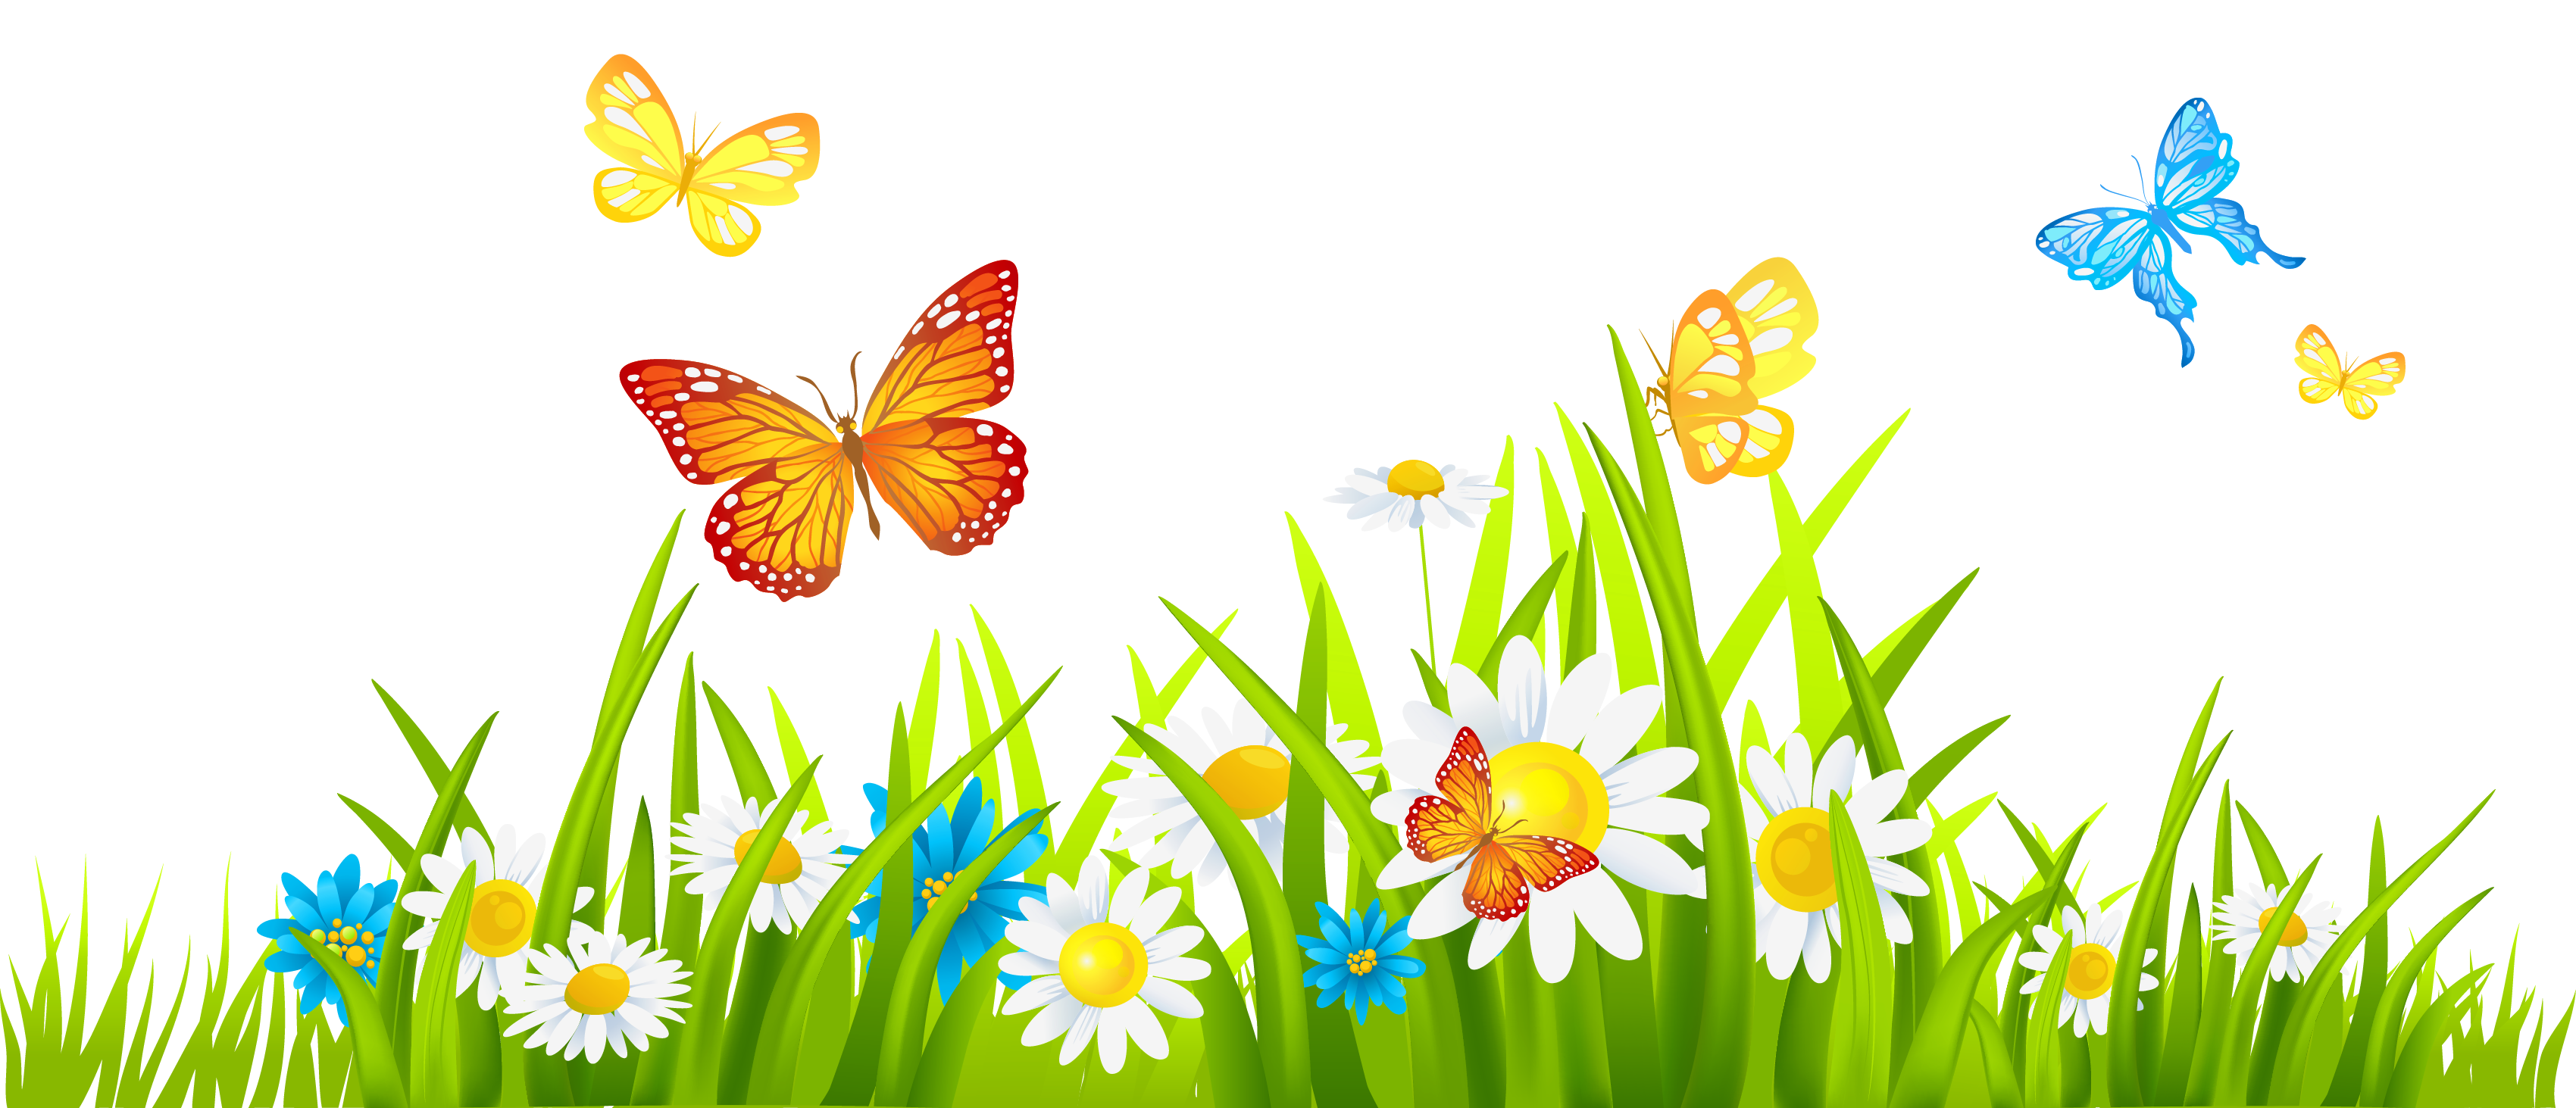 Garden Png Images Hd